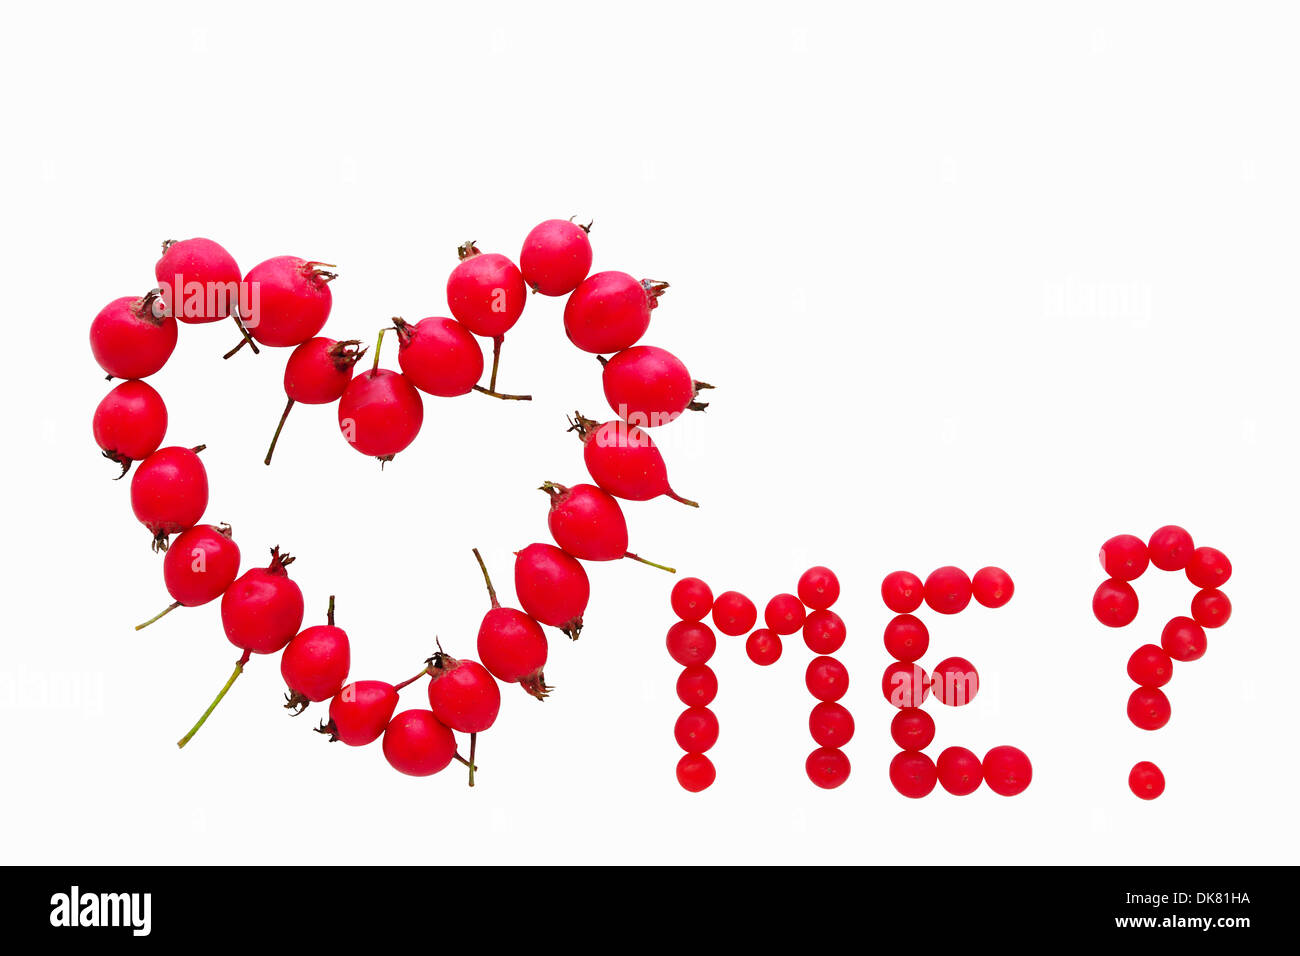 Valentine card concept. Red yew and hawthorn fruits forming 'Do you love me?' question, isolated on white background. Stock Photo